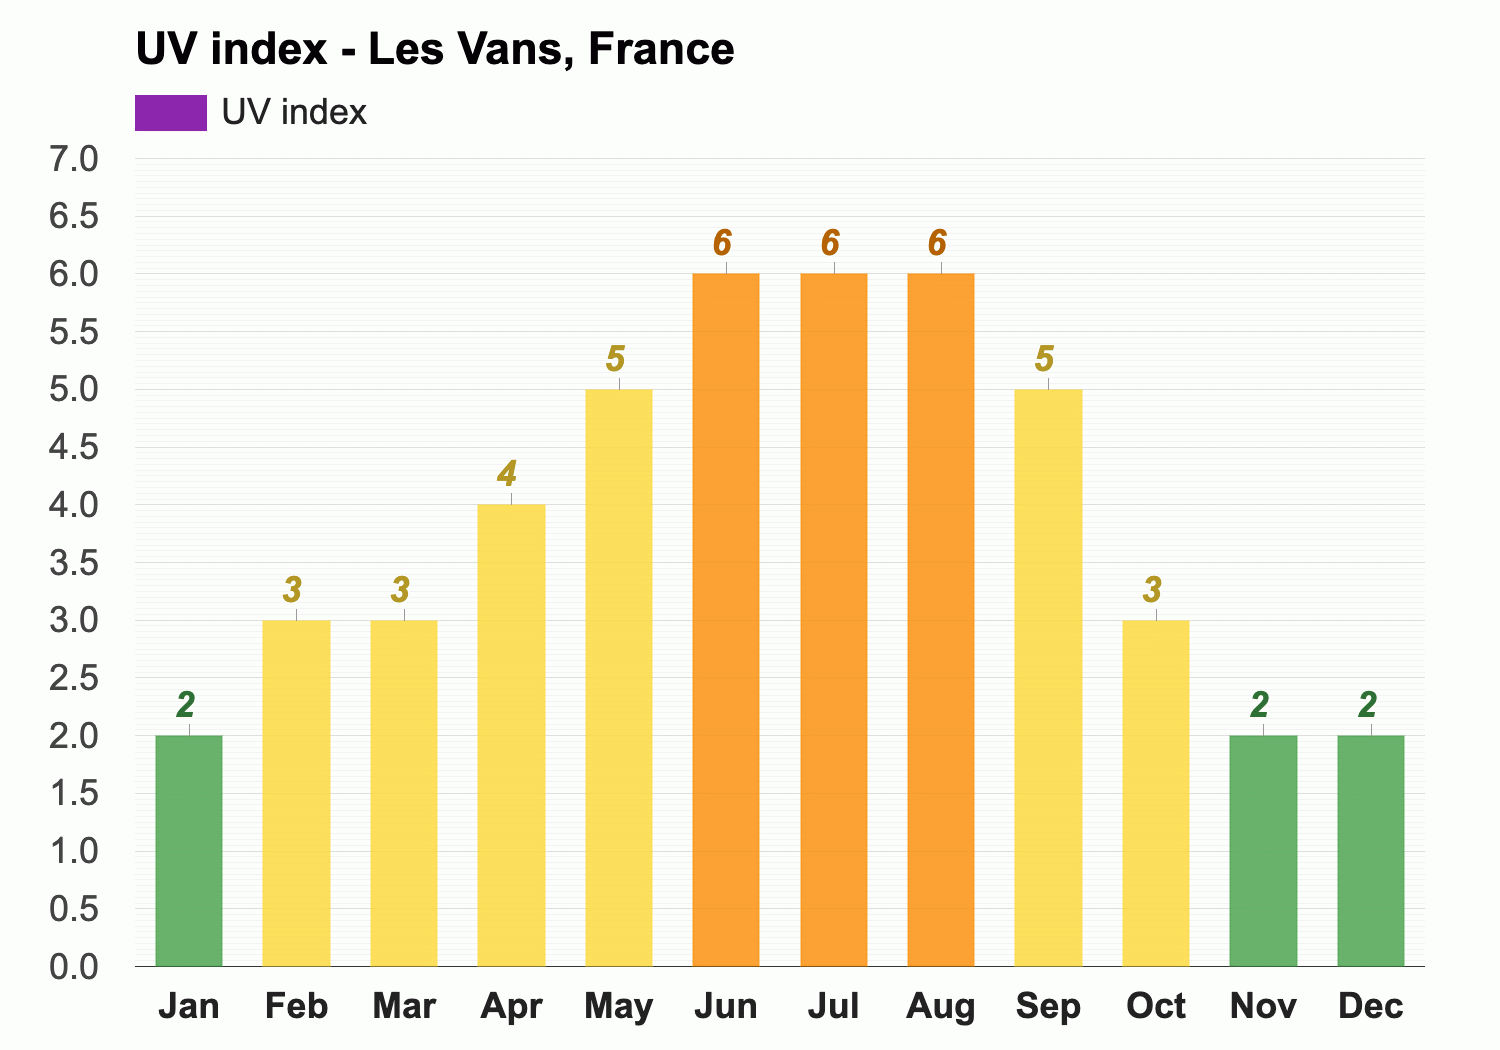 Les Vans, France - Climate & Monthly weather forecast